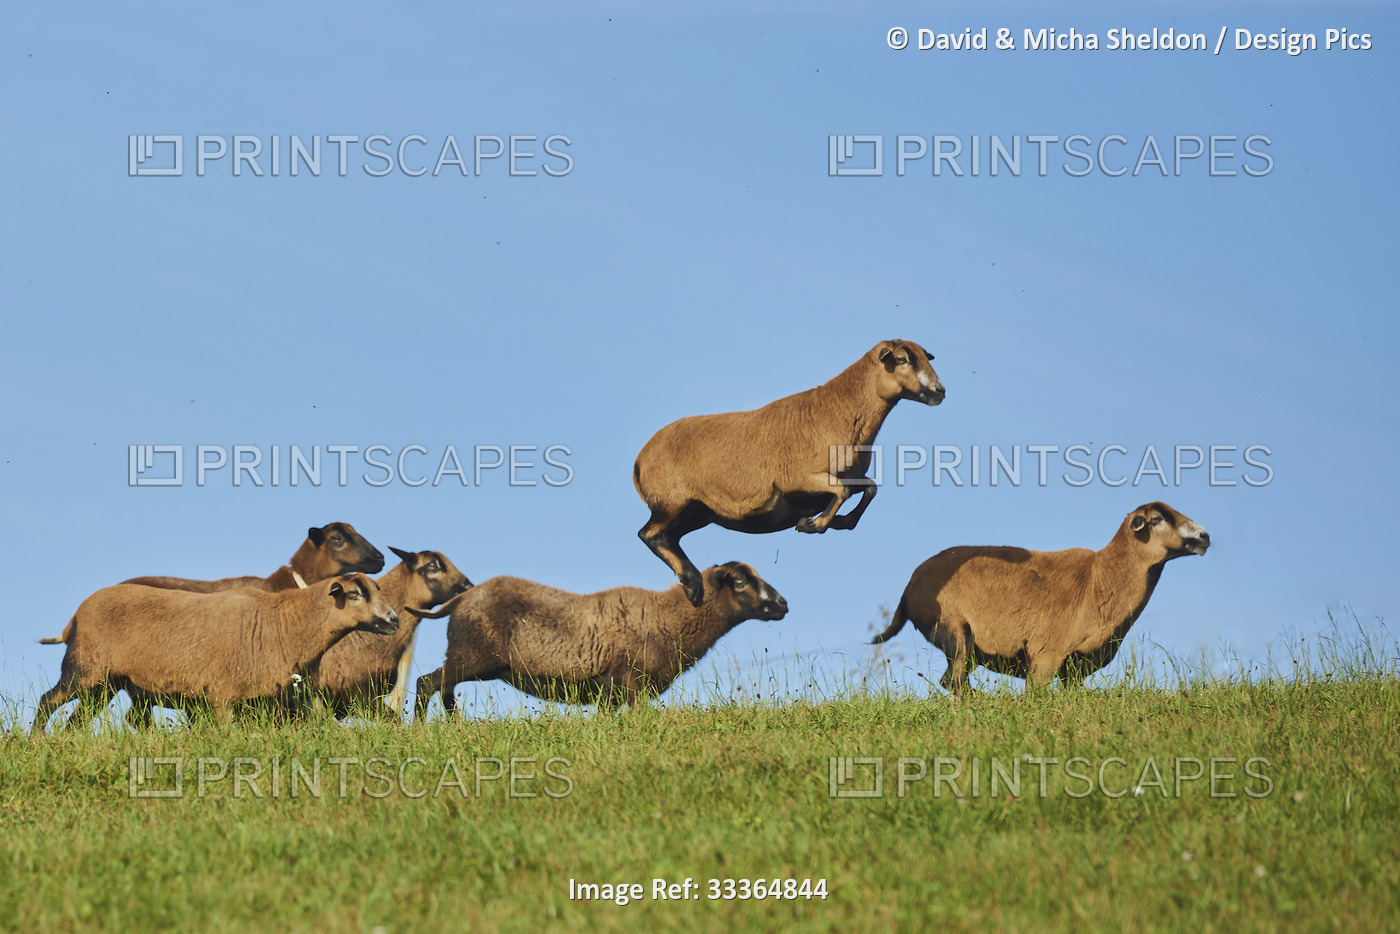 Cameroon Dwarf sheep (Ovis aries) running on a grassy meadow with one sheep ...